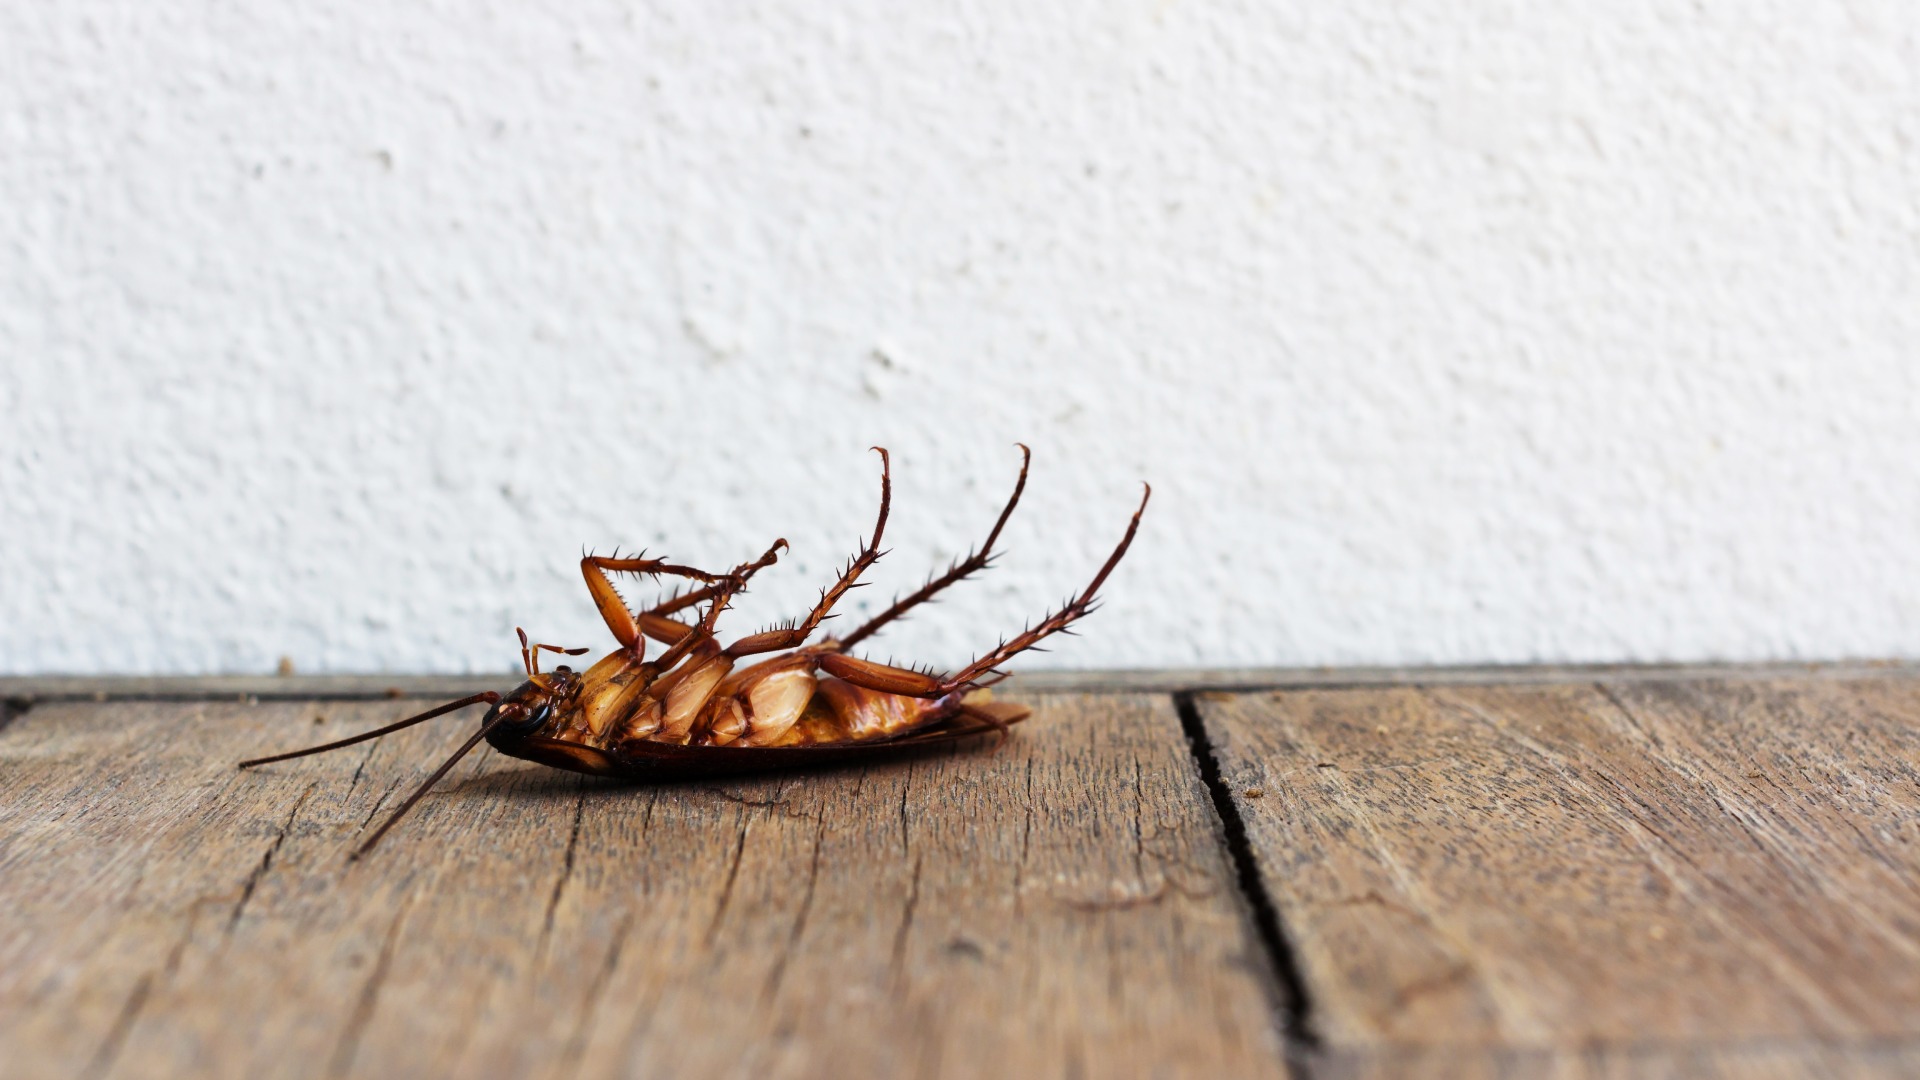 Summer Is Pest Season in Tennessee - Schedule Pest Control Treatments Now!